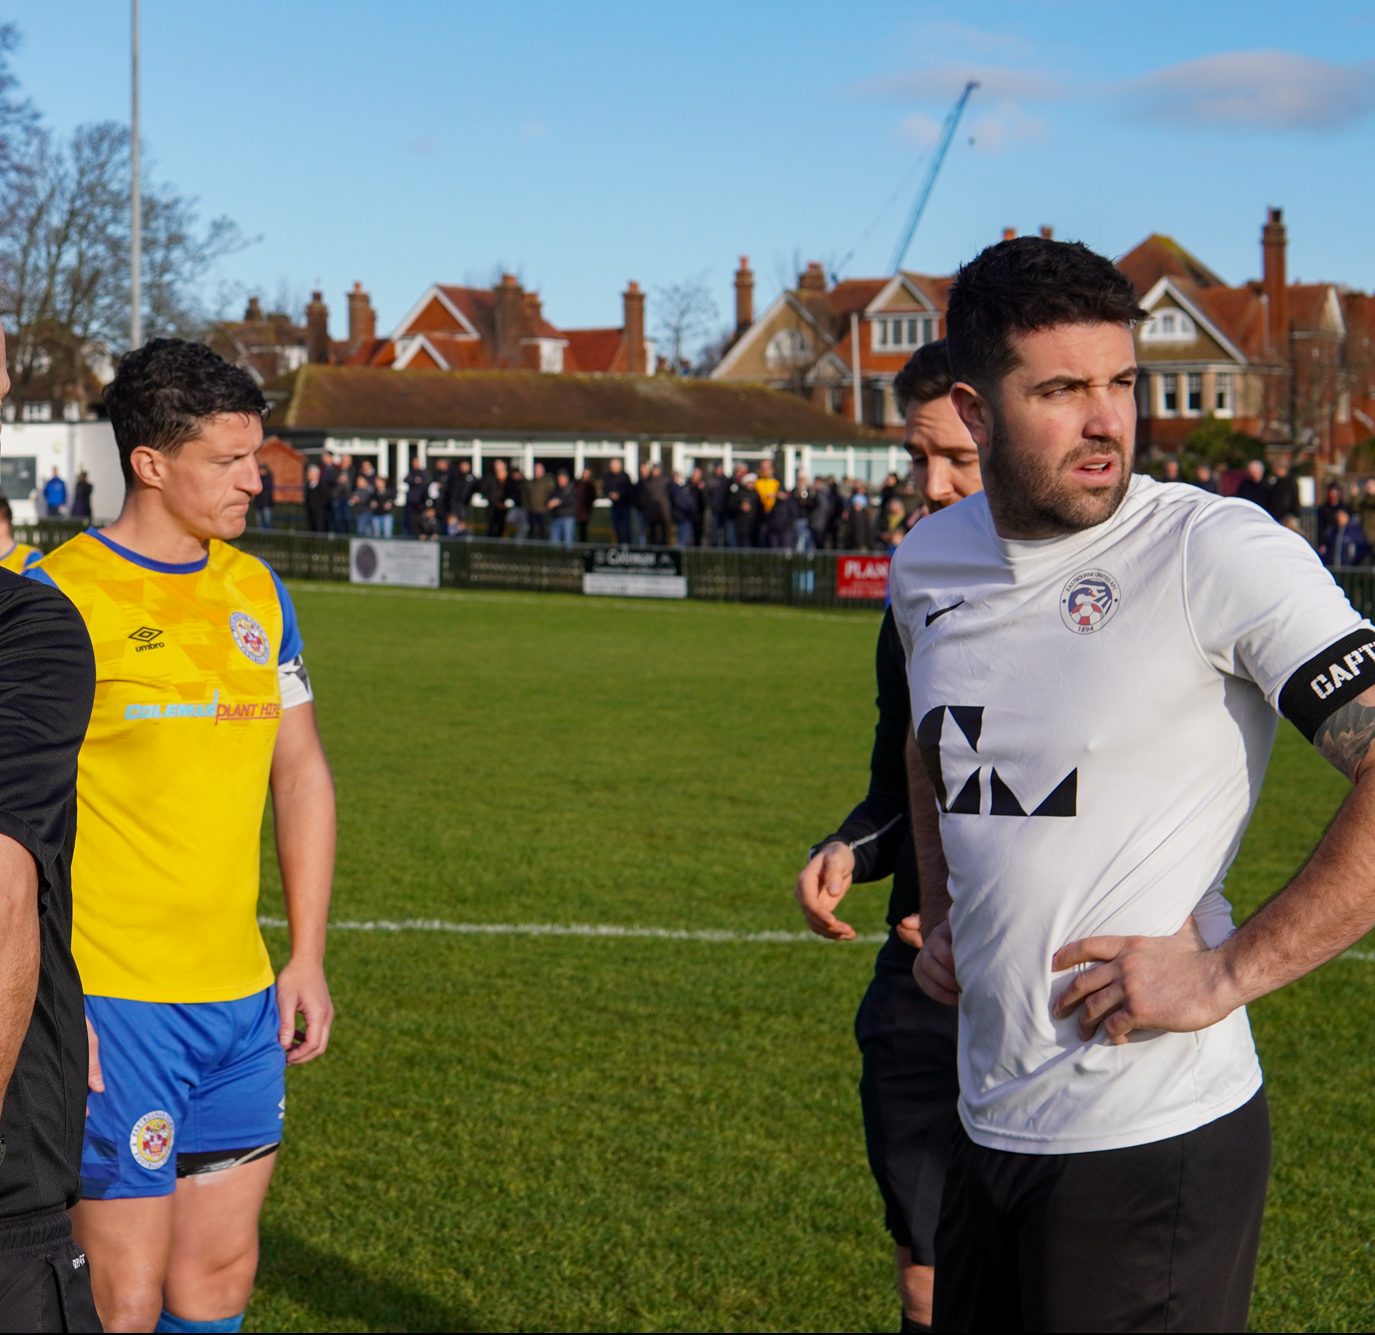 Frankie Chappell of Eastbourne Town and Sam Cole of Eastbounre United with match officials for coin toss.